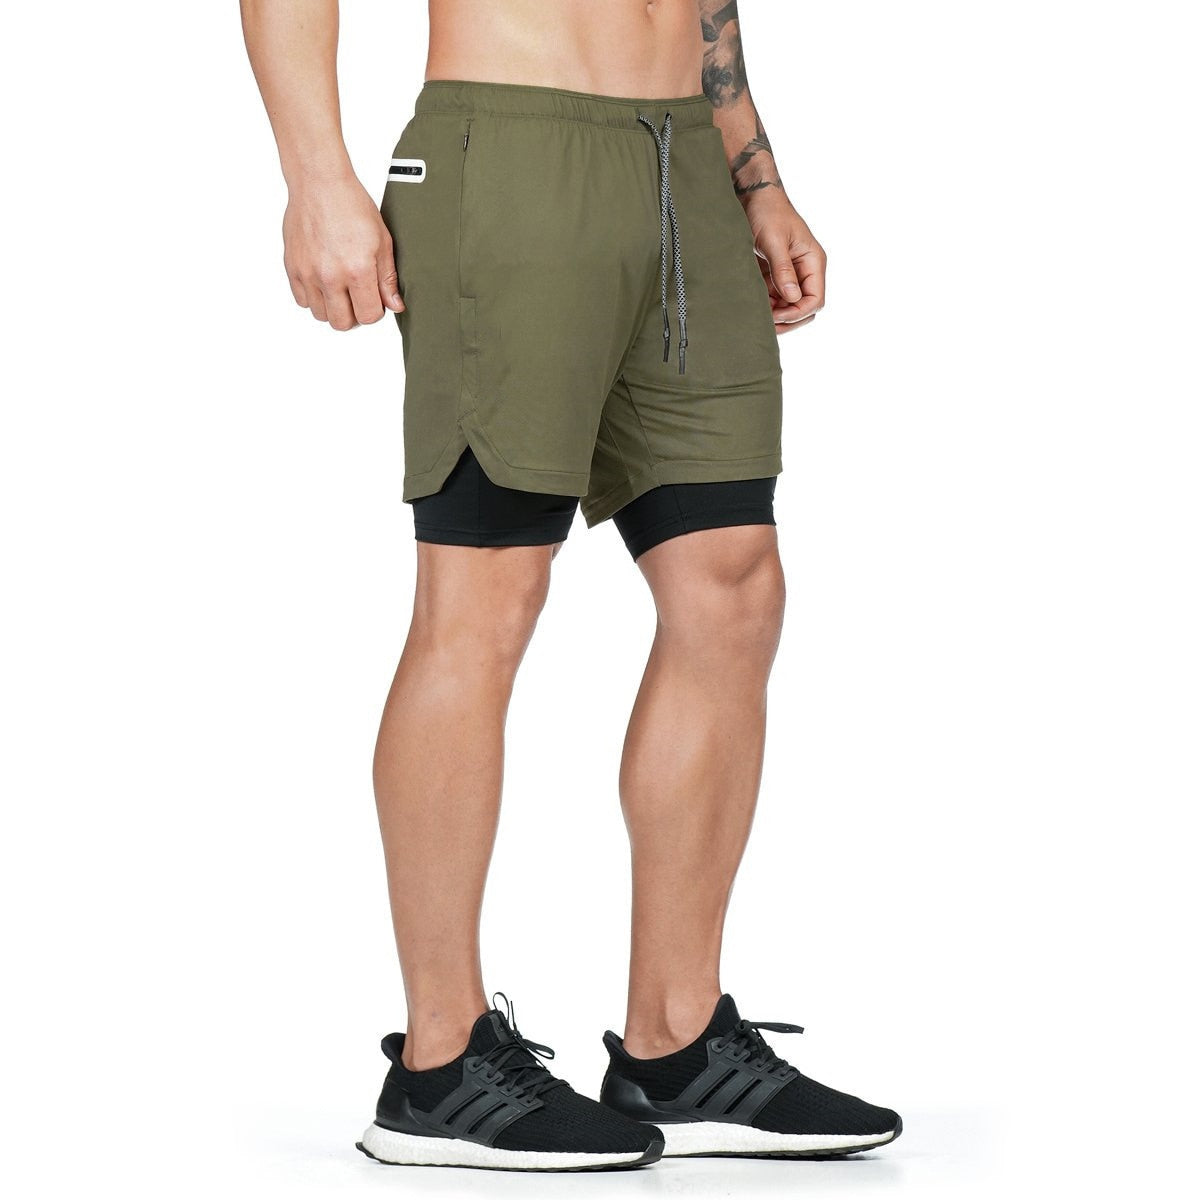 Camo Running Shorts for Men - 2-in-1 Quick Dry Workout Shorts for Gym, Sports, and Jogging | Summer Fitness Shorts